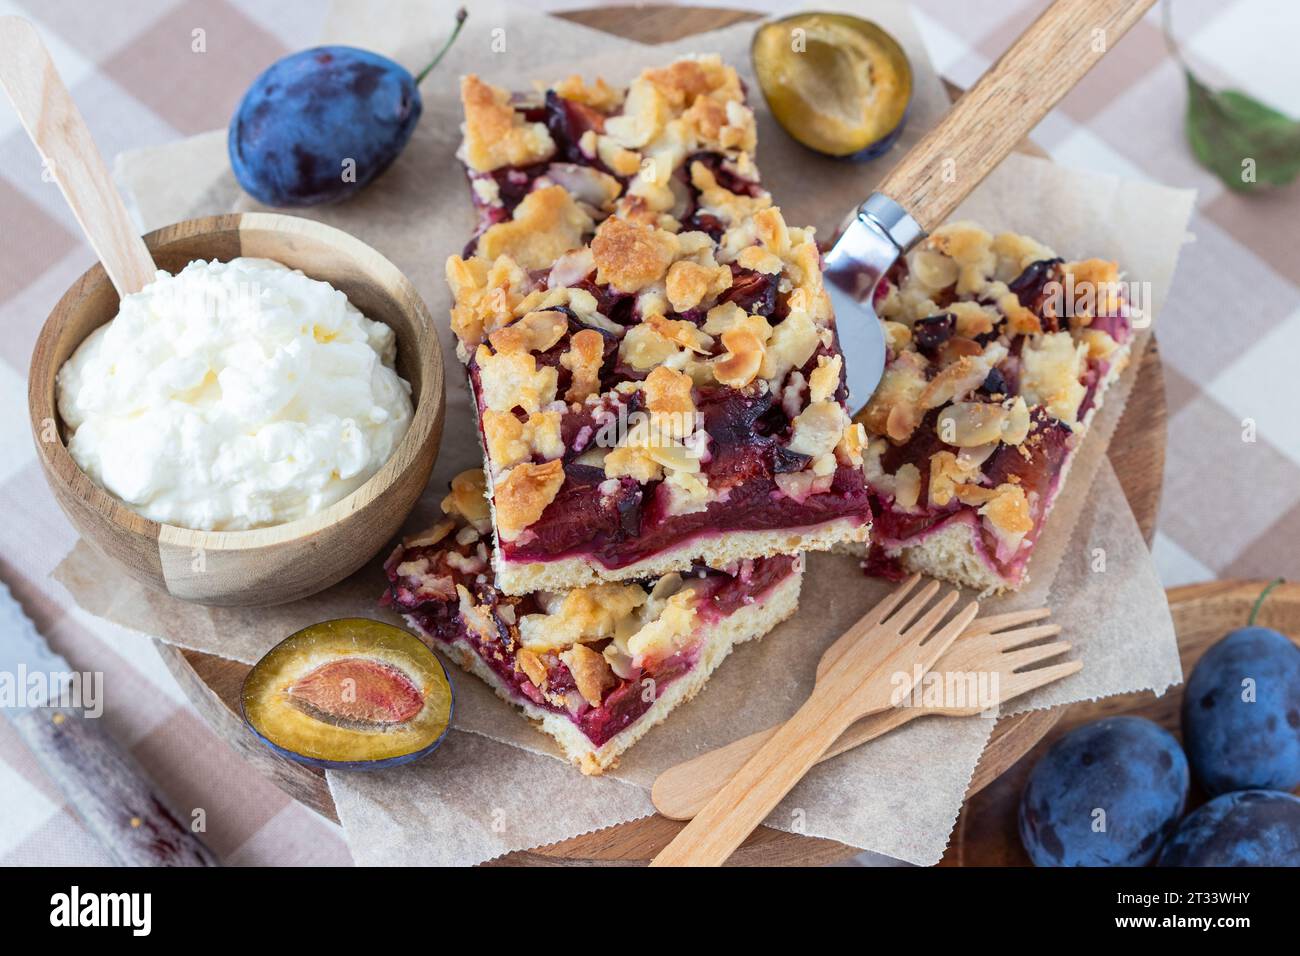 German plum sheet cake with butter crumble and whipped cream Stock Photo